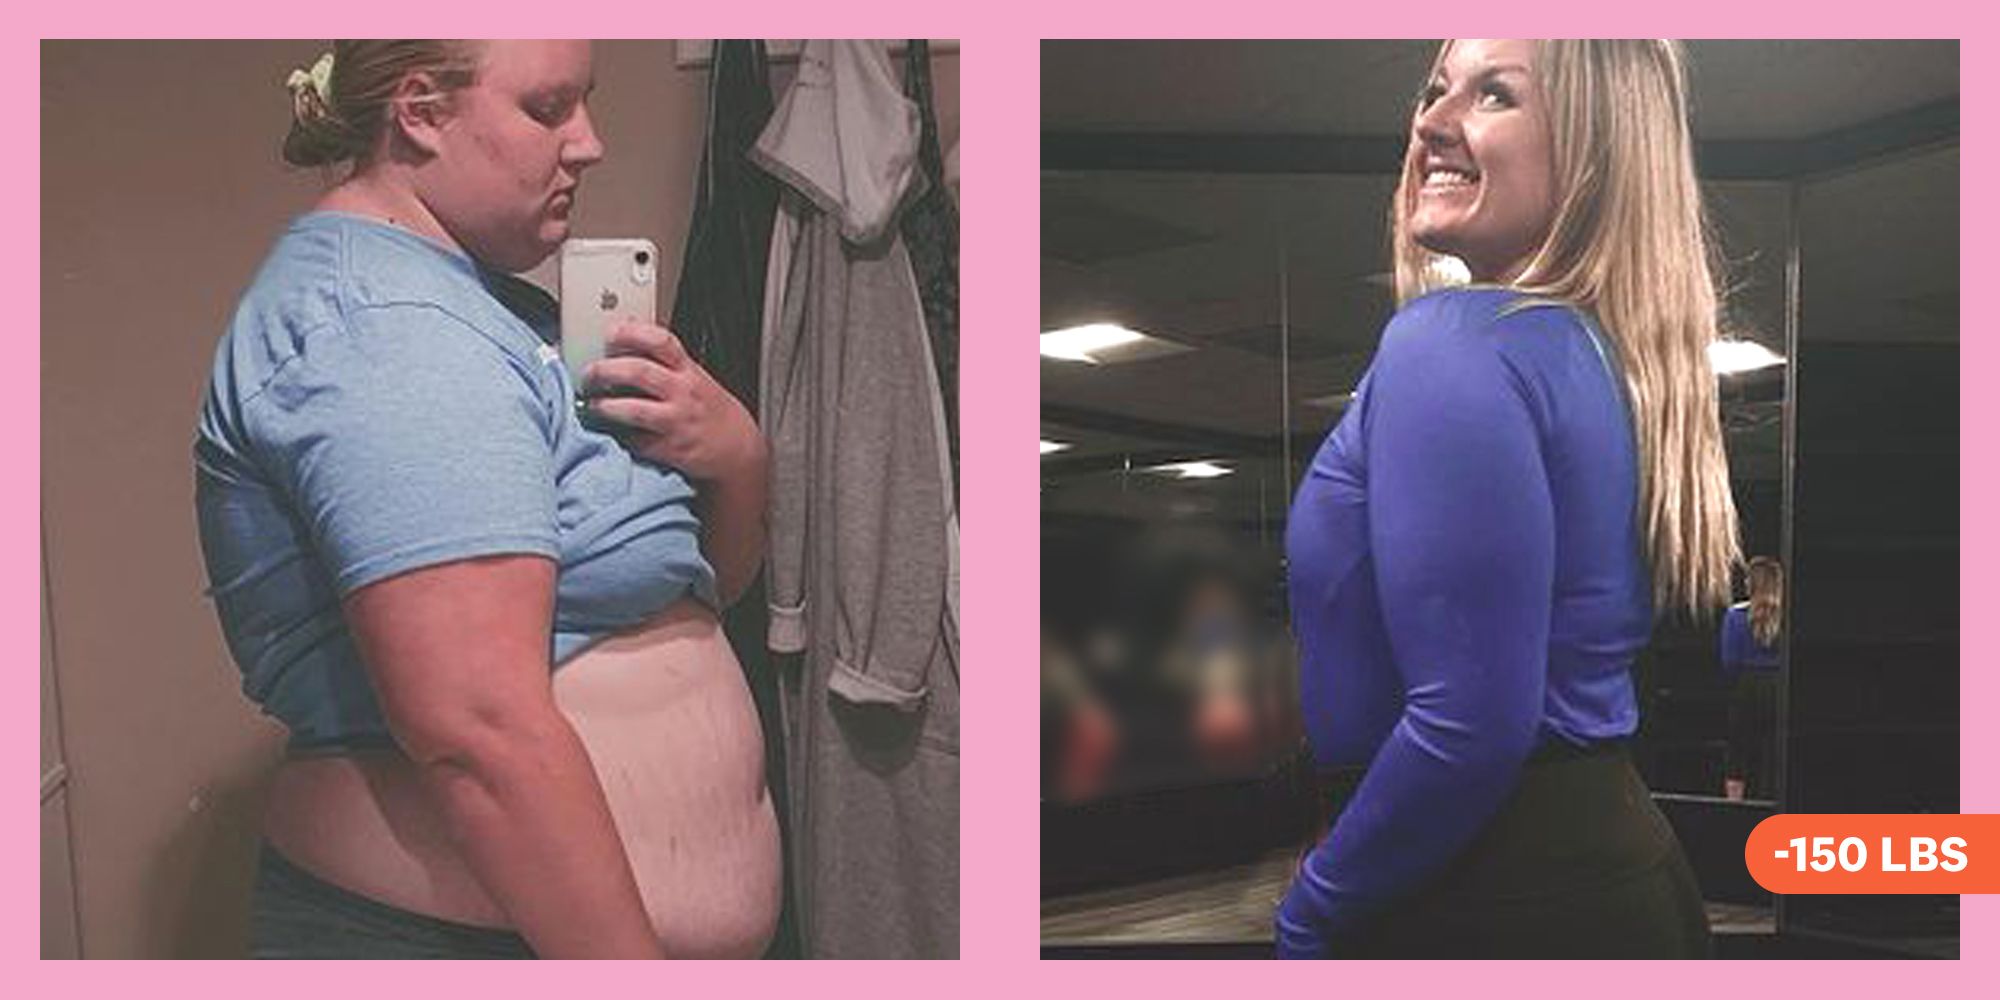 Weight Loss Inspiration: How One Woman Lost 60 Pounds and Regained Her  Mental Health